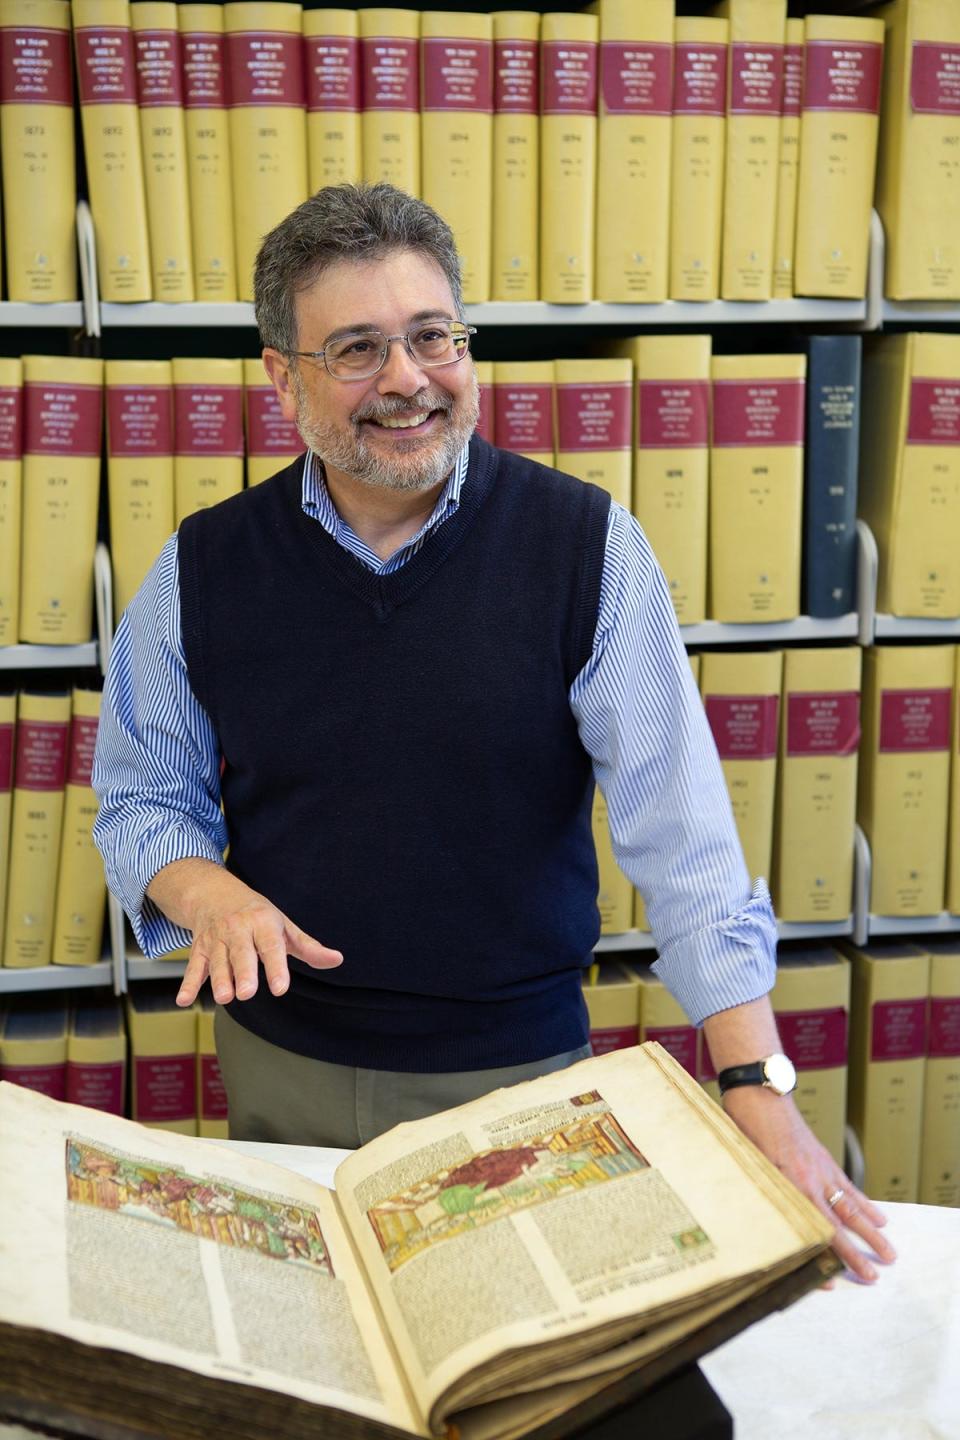 Kean University history Professor Christopher Bellitto will step onto an international stage June 23 at the World Meeting of Families in the Vatican, discussing the relationship between the elderly and the young in the context of the Bible.